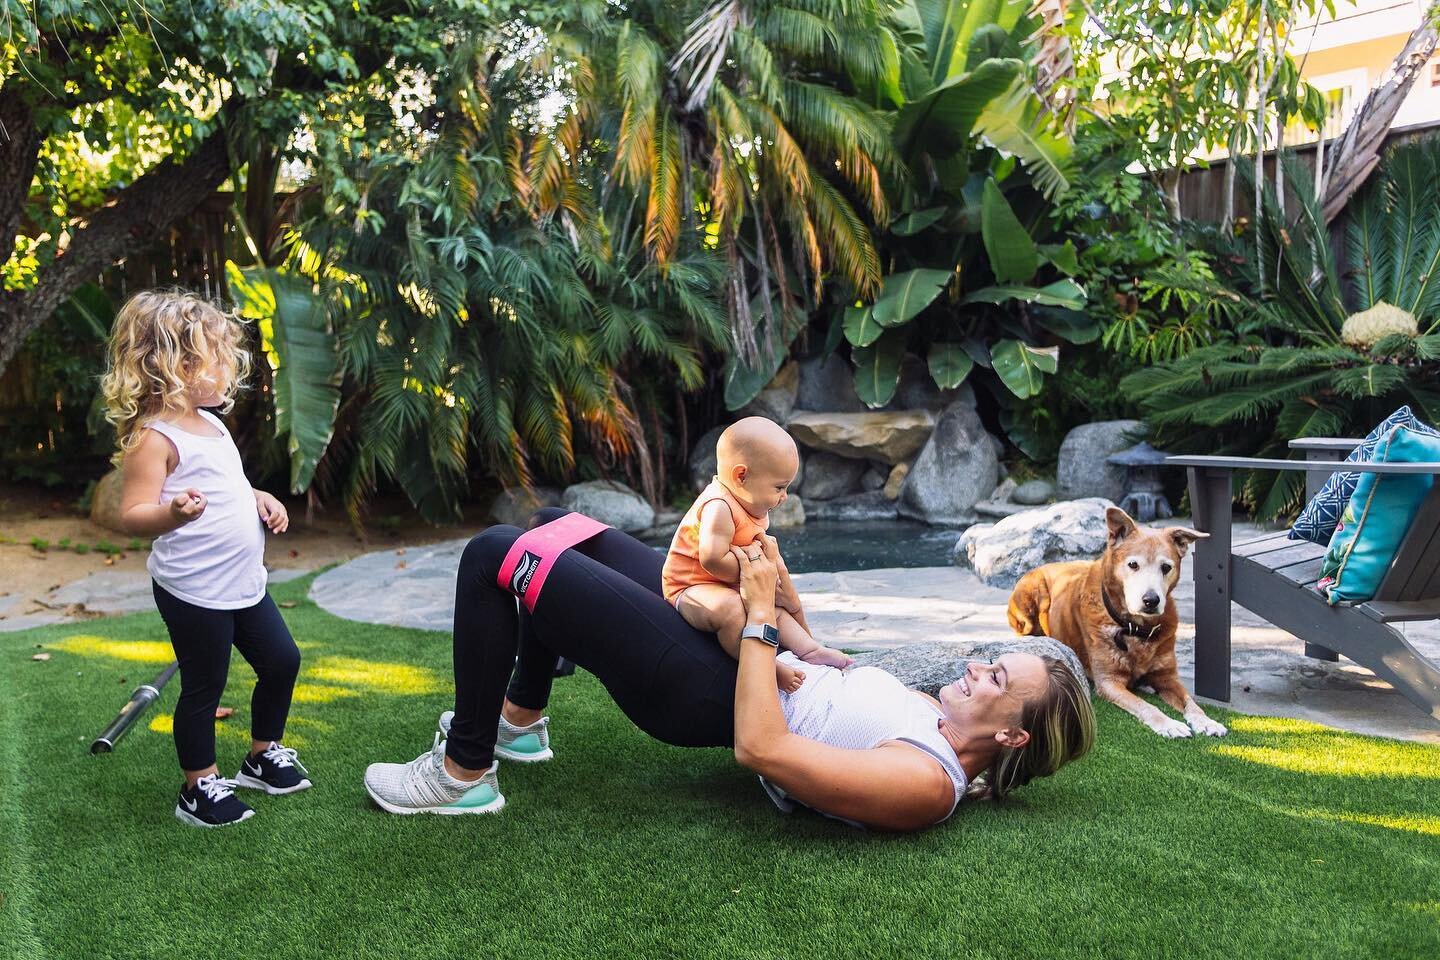 Postpartum Core work 🤱🏼🤰🏼

During pregnancy our musculoskeletal system changes greatly. As our belly expands, the abdominals stretch and our back muscles shorten. The connective tissue in the linea alba thins and separates (read more on the blog 